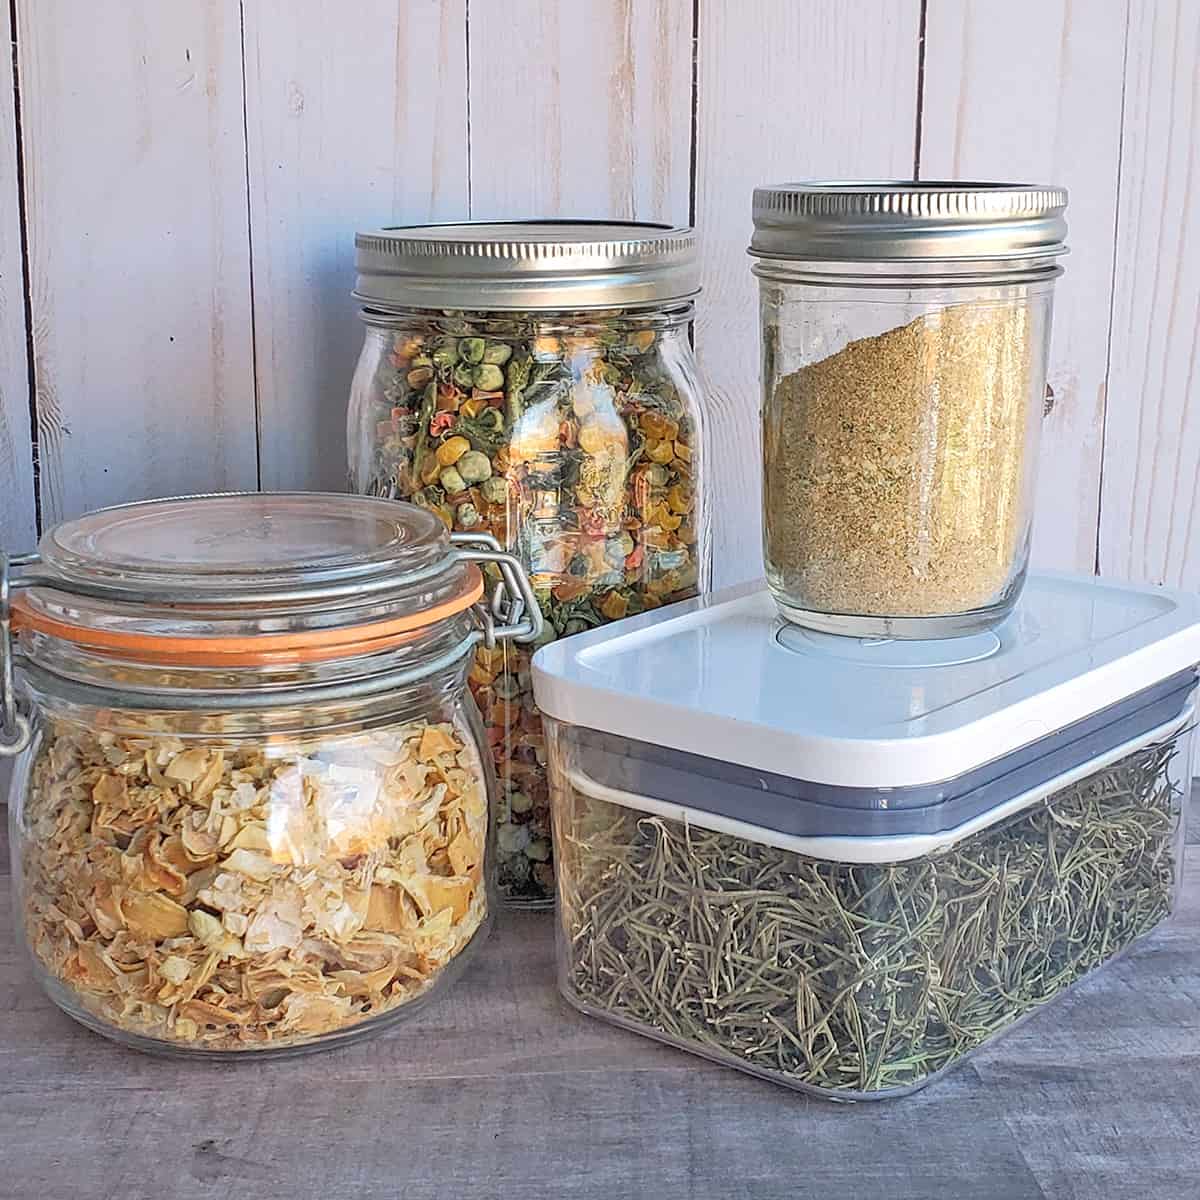 https://www.thepurposefulpantry.com/wp-content/uploads/2021/02/best-storage-containers-for-dehydrated-food-FEAT2.jpg